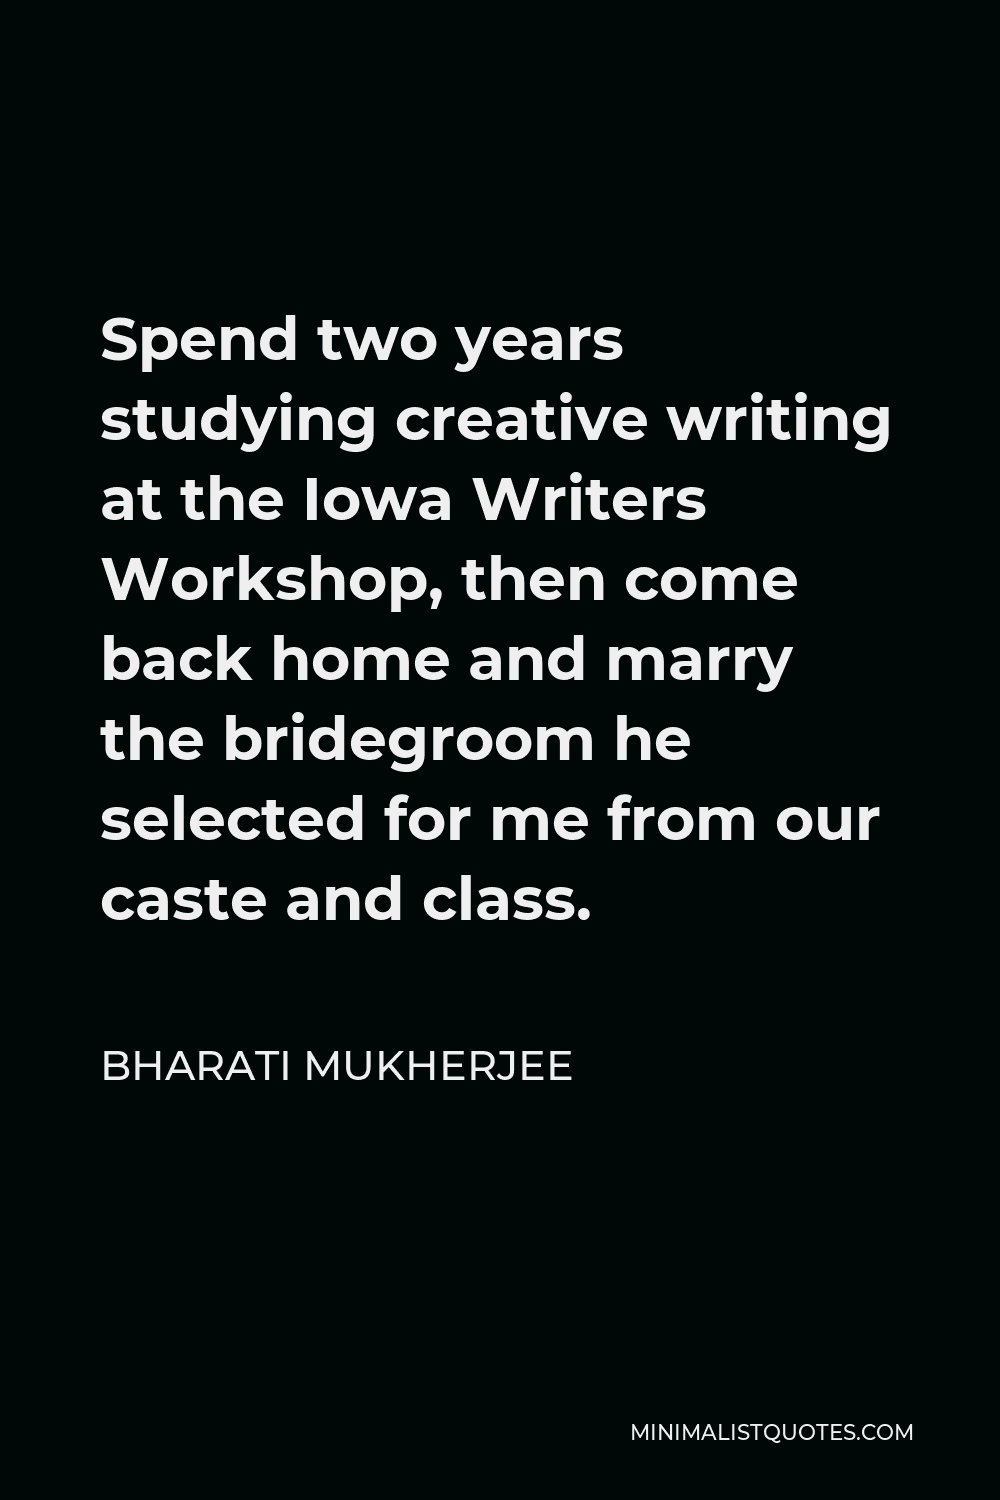 Bharati Mukherjee Quote - Spend two years studying creative writing at the Iowa Writers Workshop, then come back home and marry the bridegroom he selected for me from our caste and class.